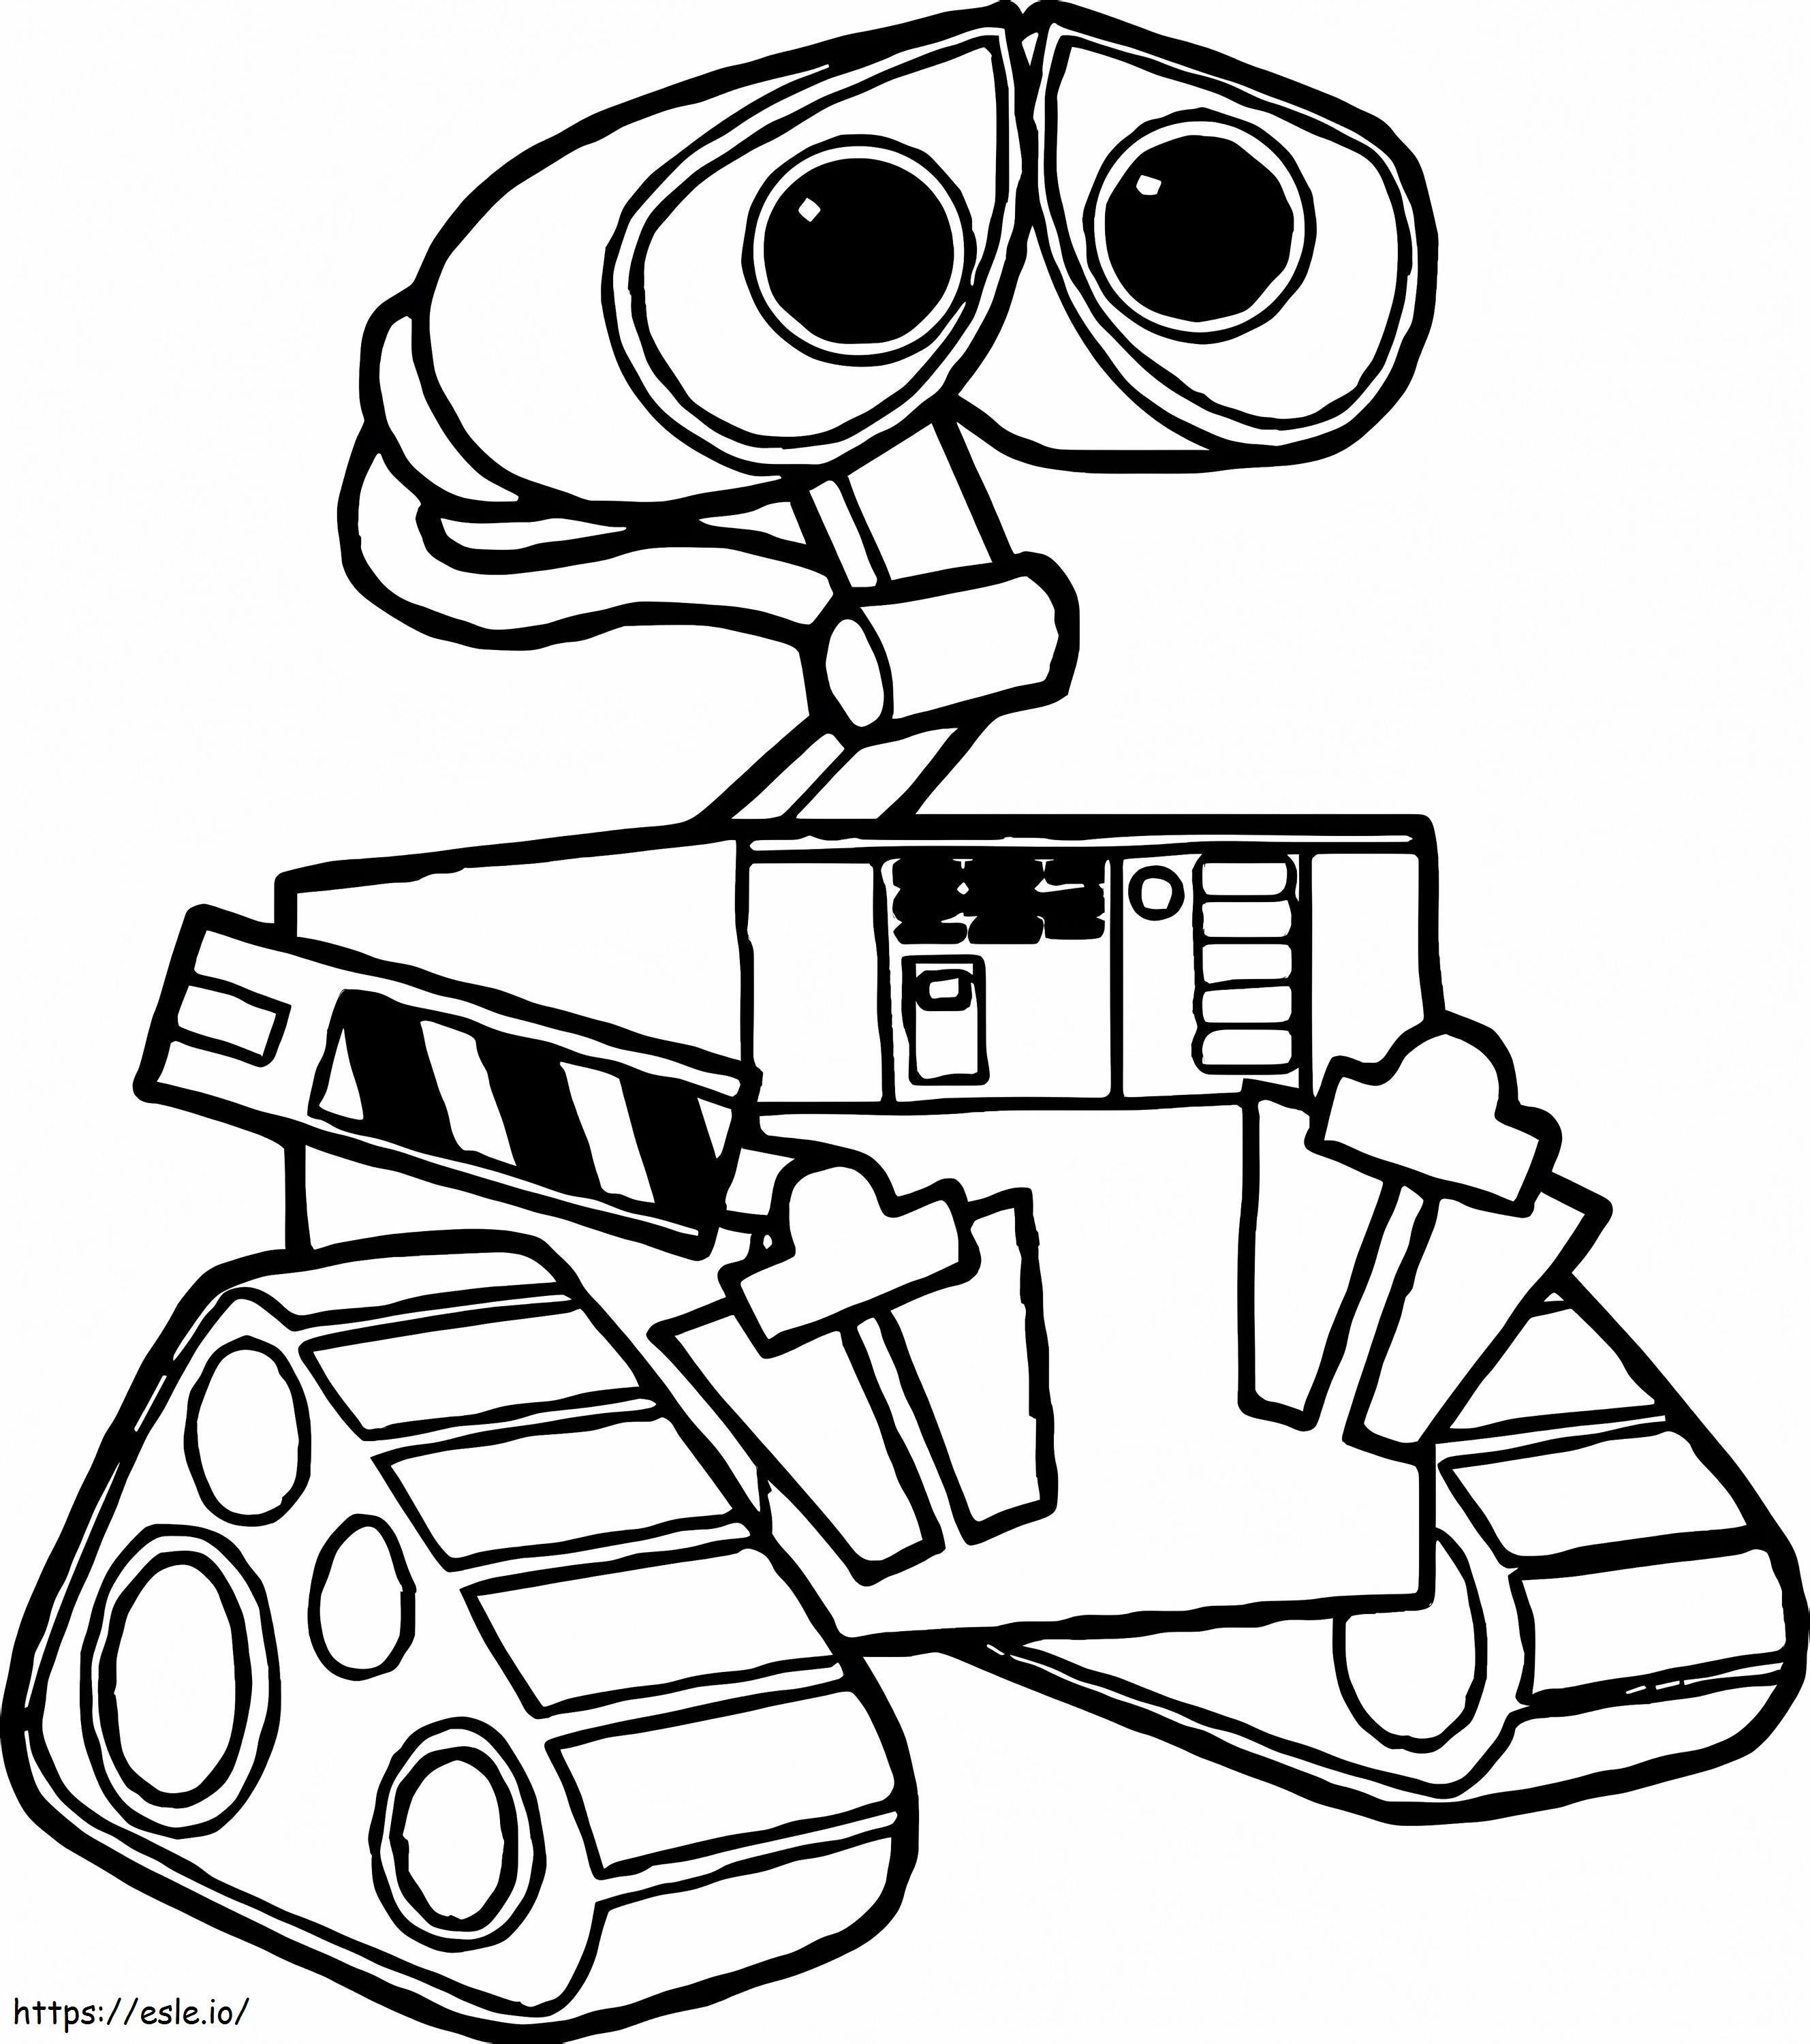 Tracking Robot coloring page